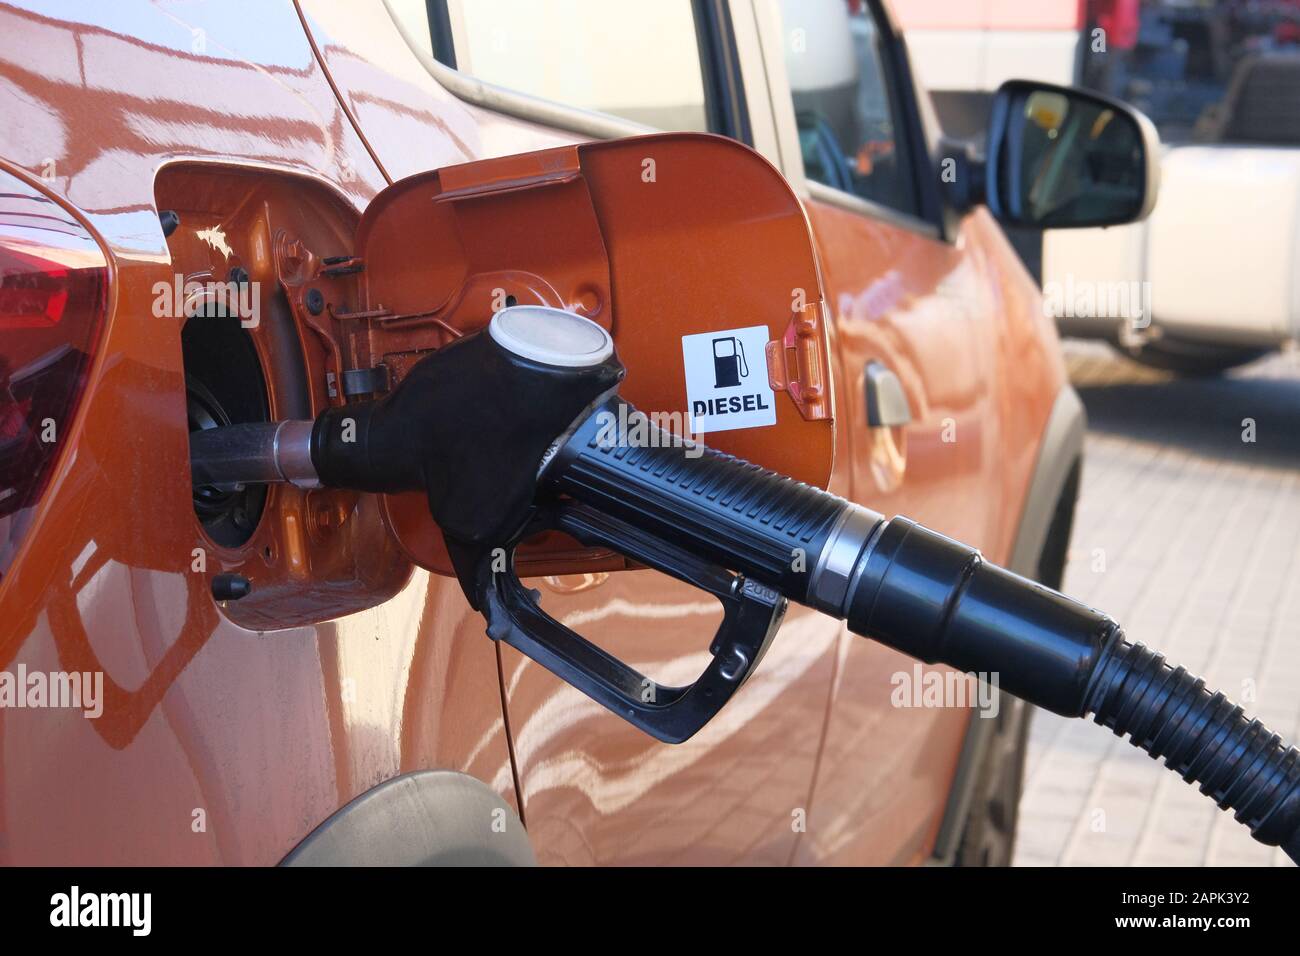 Car fill with diesel at gas station. Pumping diesel fuel in orange car at gas station close up. Stock Photo